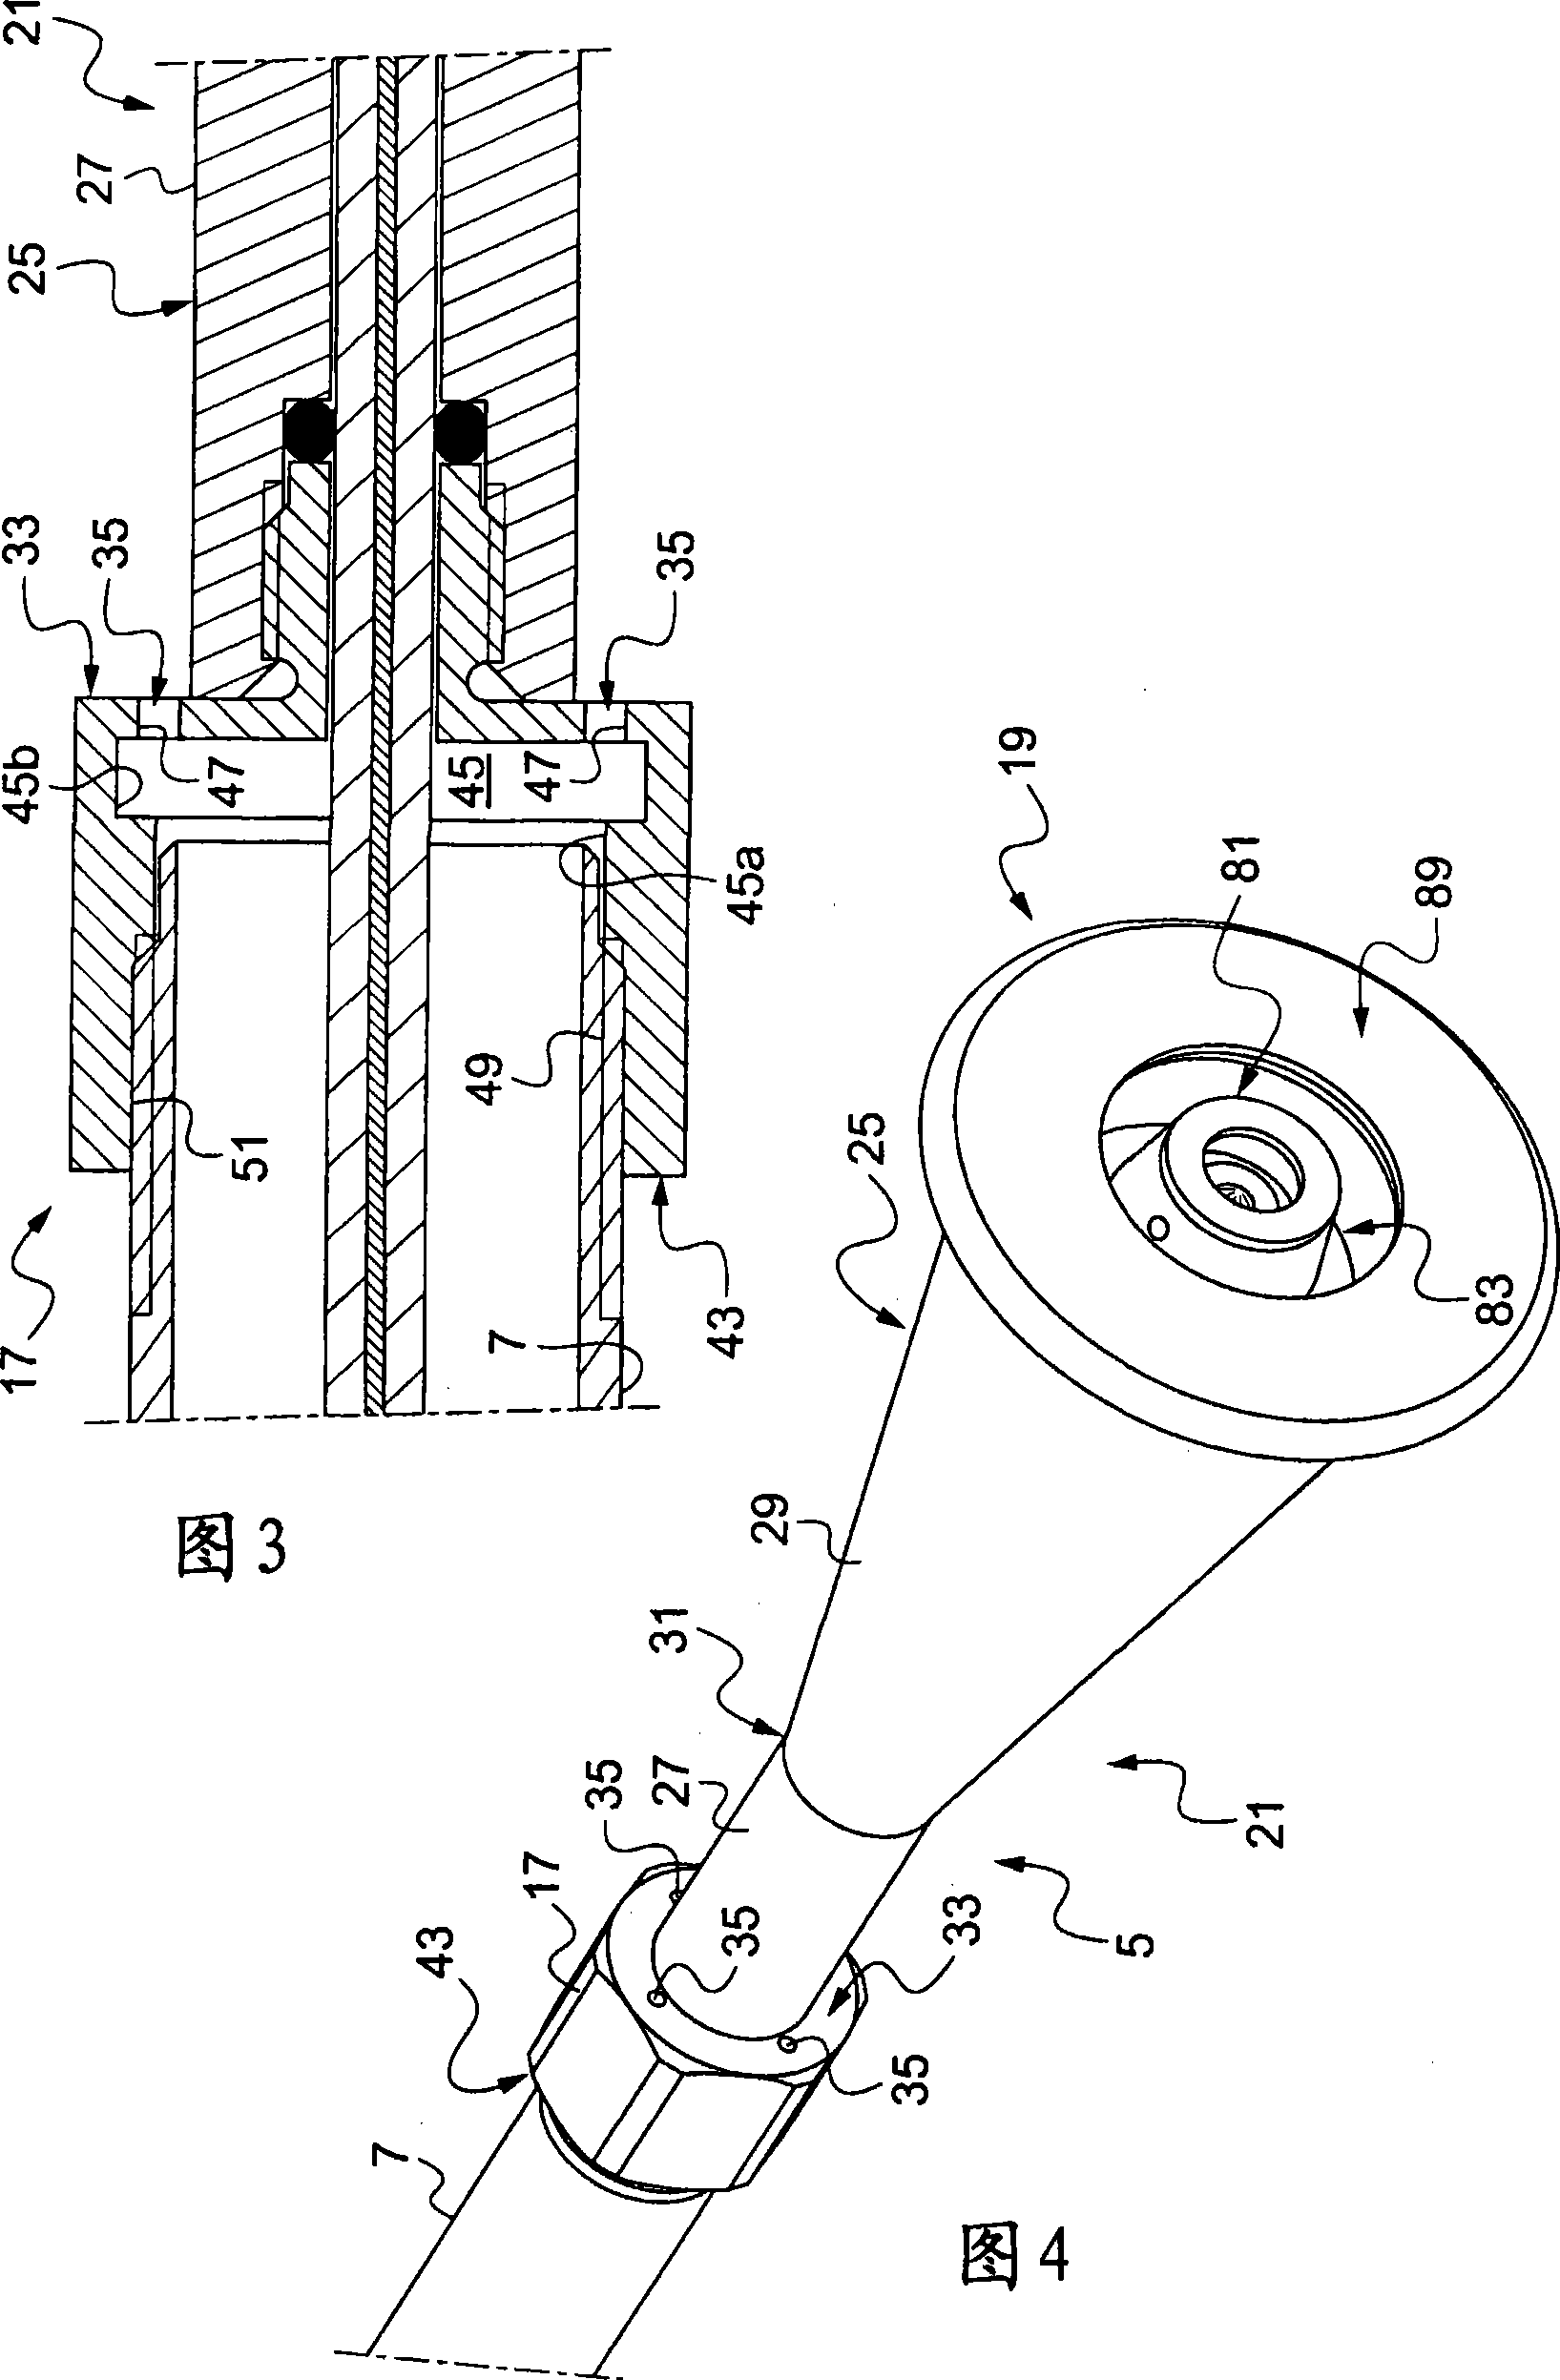 Handtool with improved gas combustion